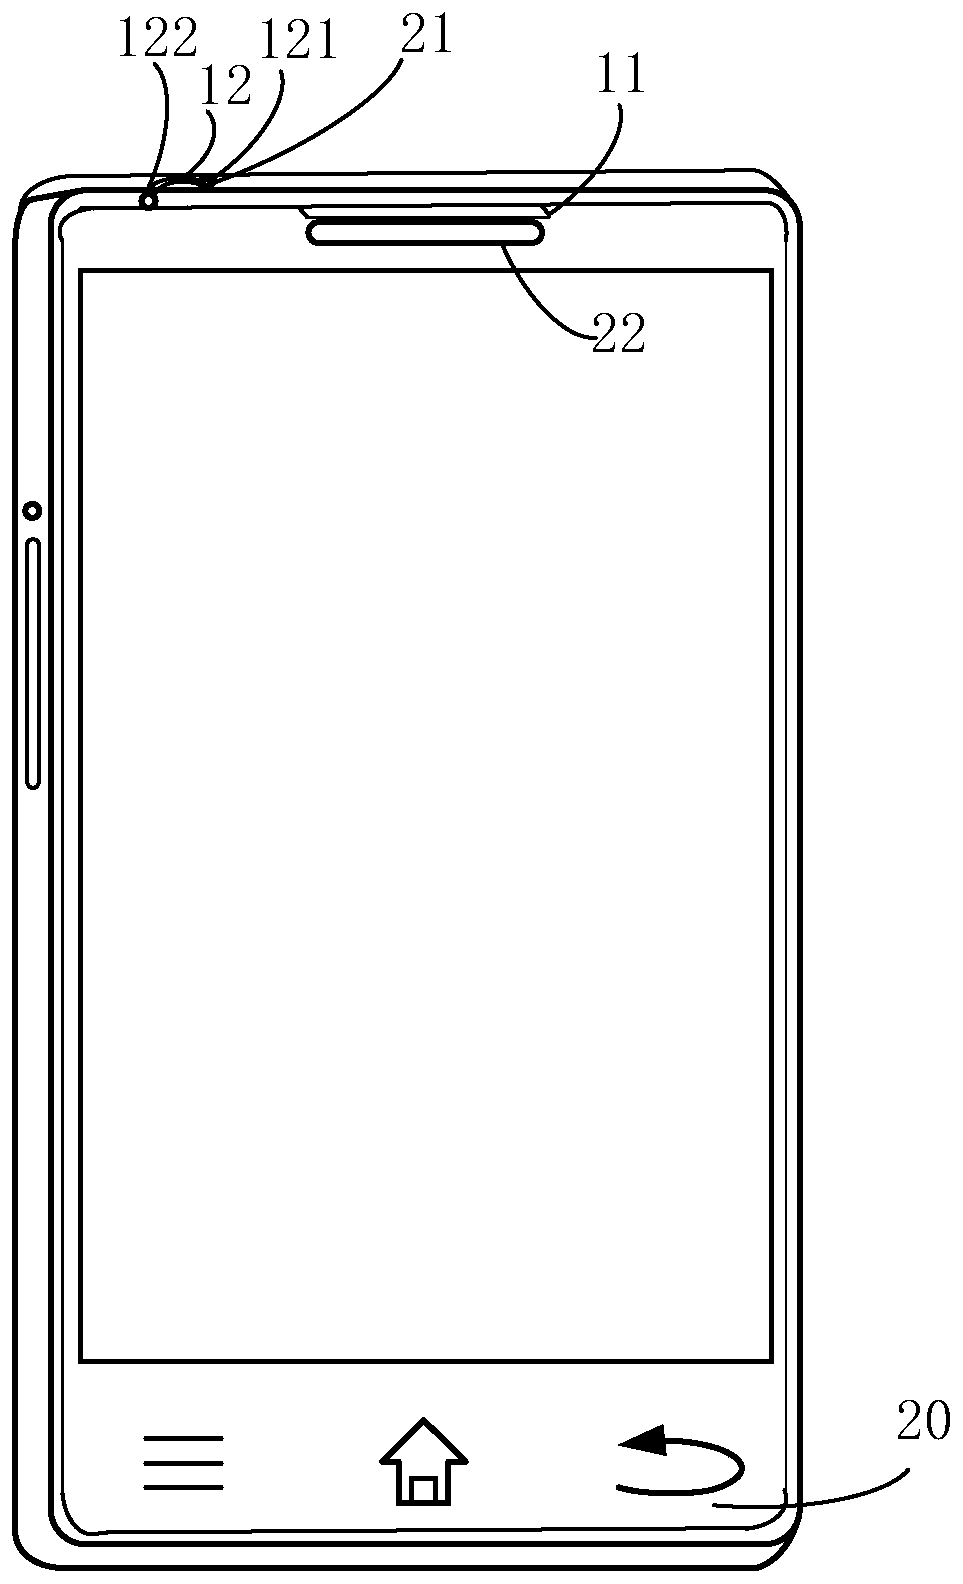 Terminal protective case, touch recognition method and device